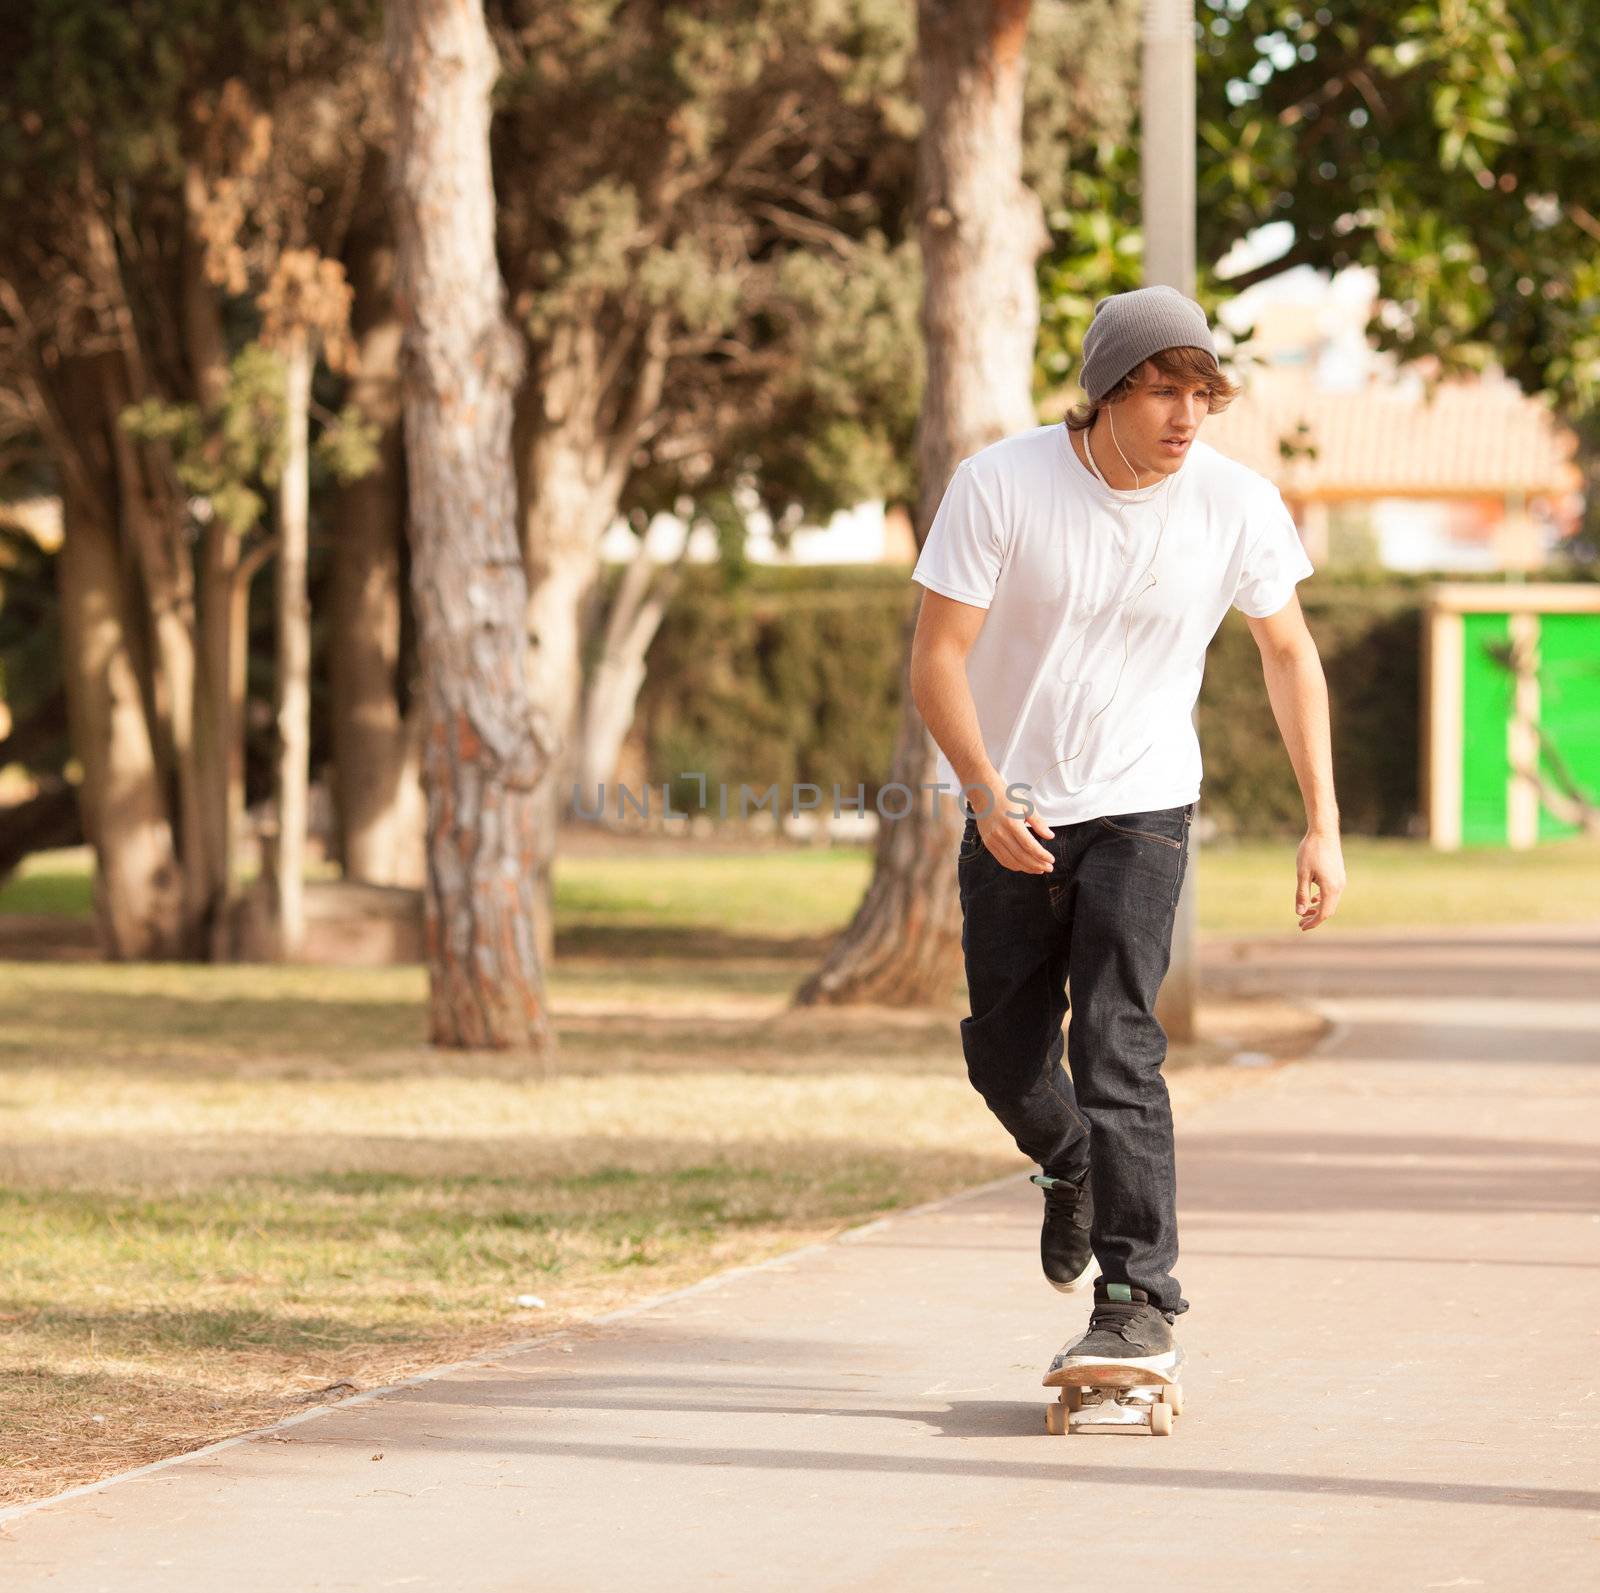 young skater rolling down the street by Lcrespi